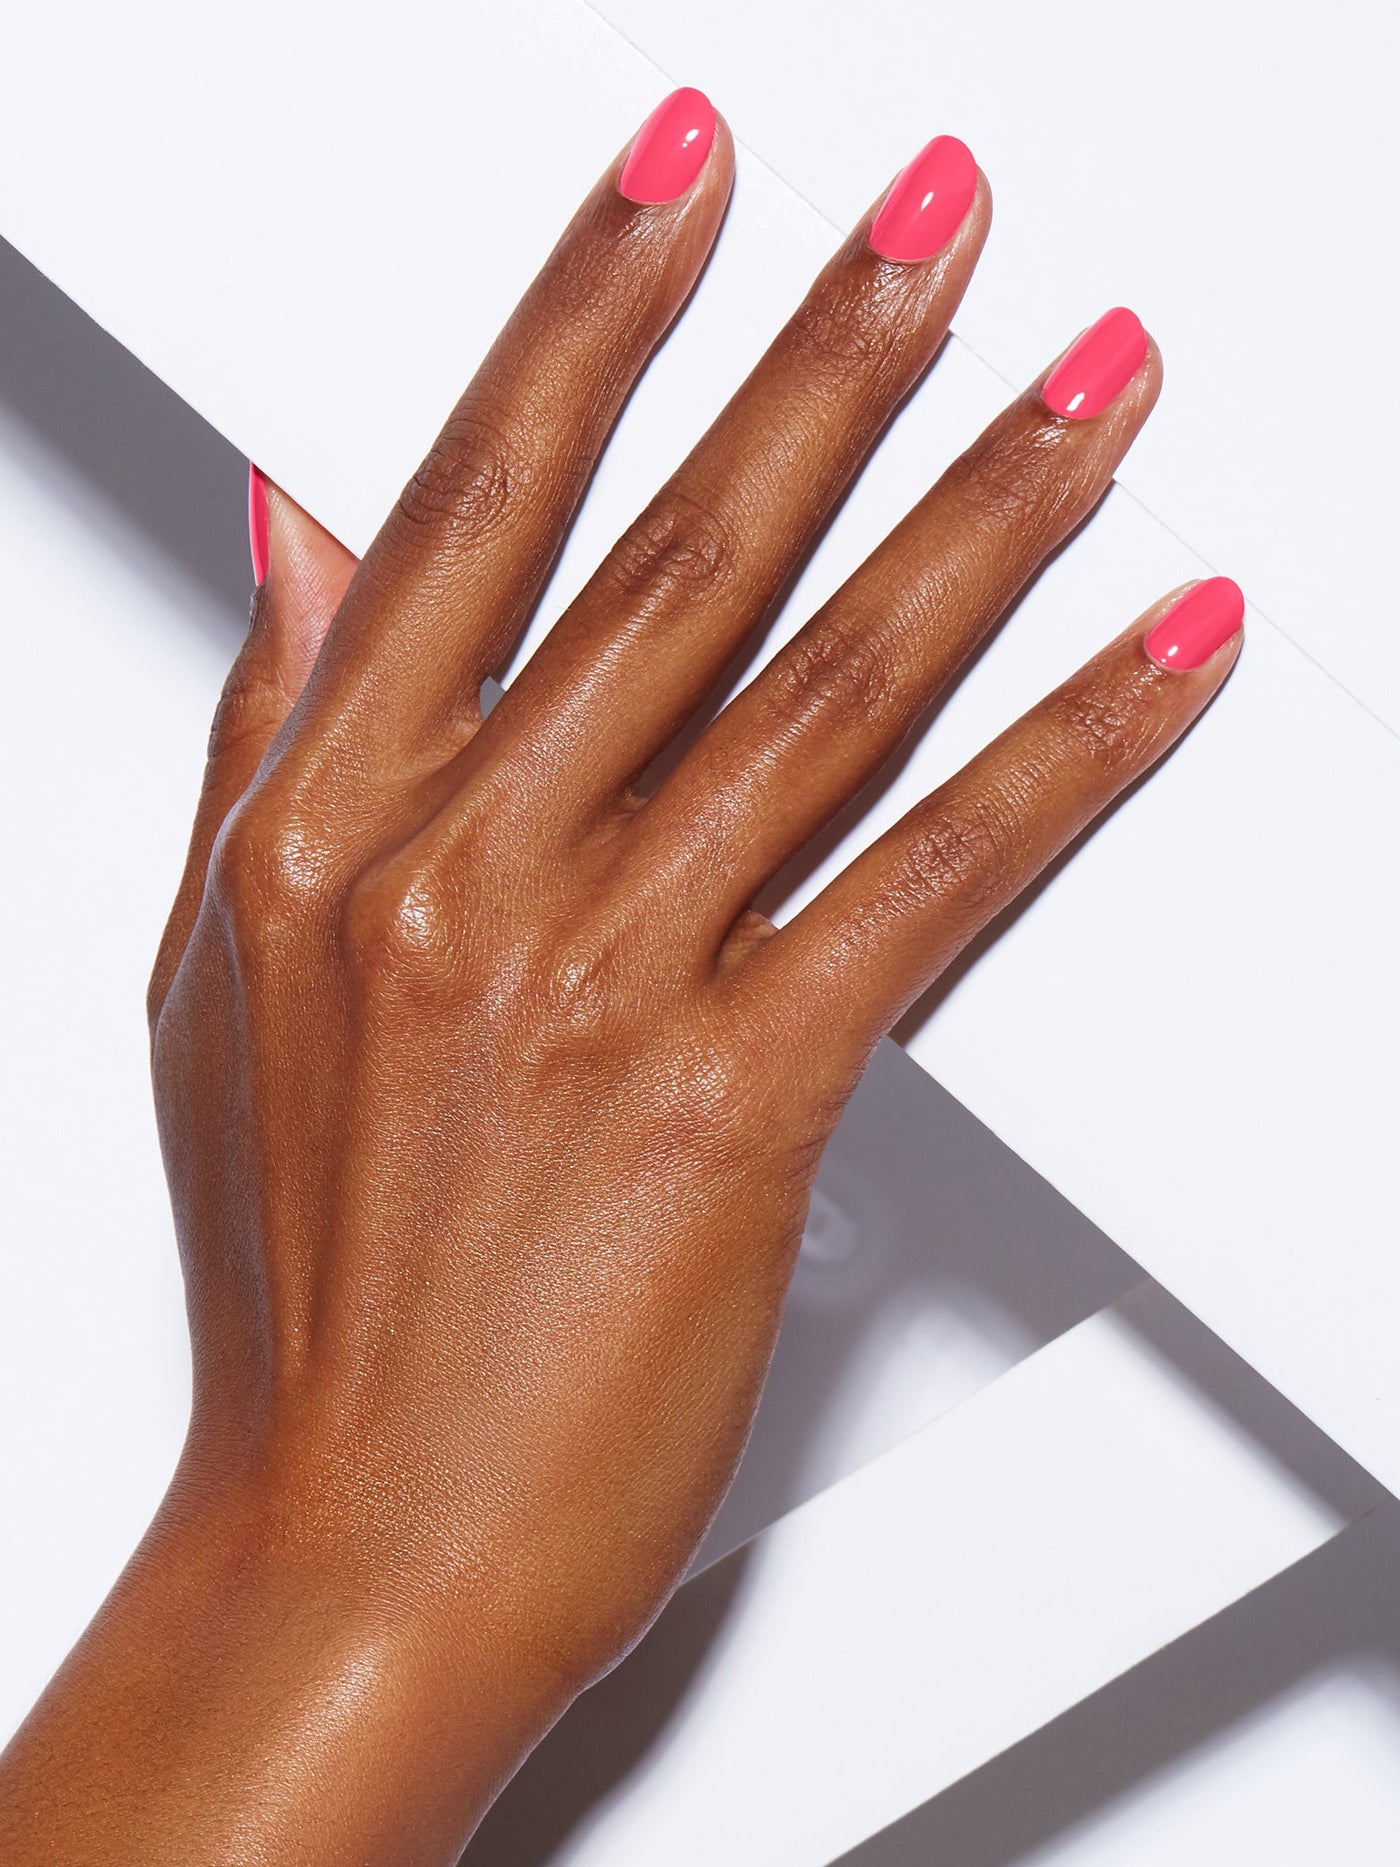 Bright coral pink, Full coverage, Rich